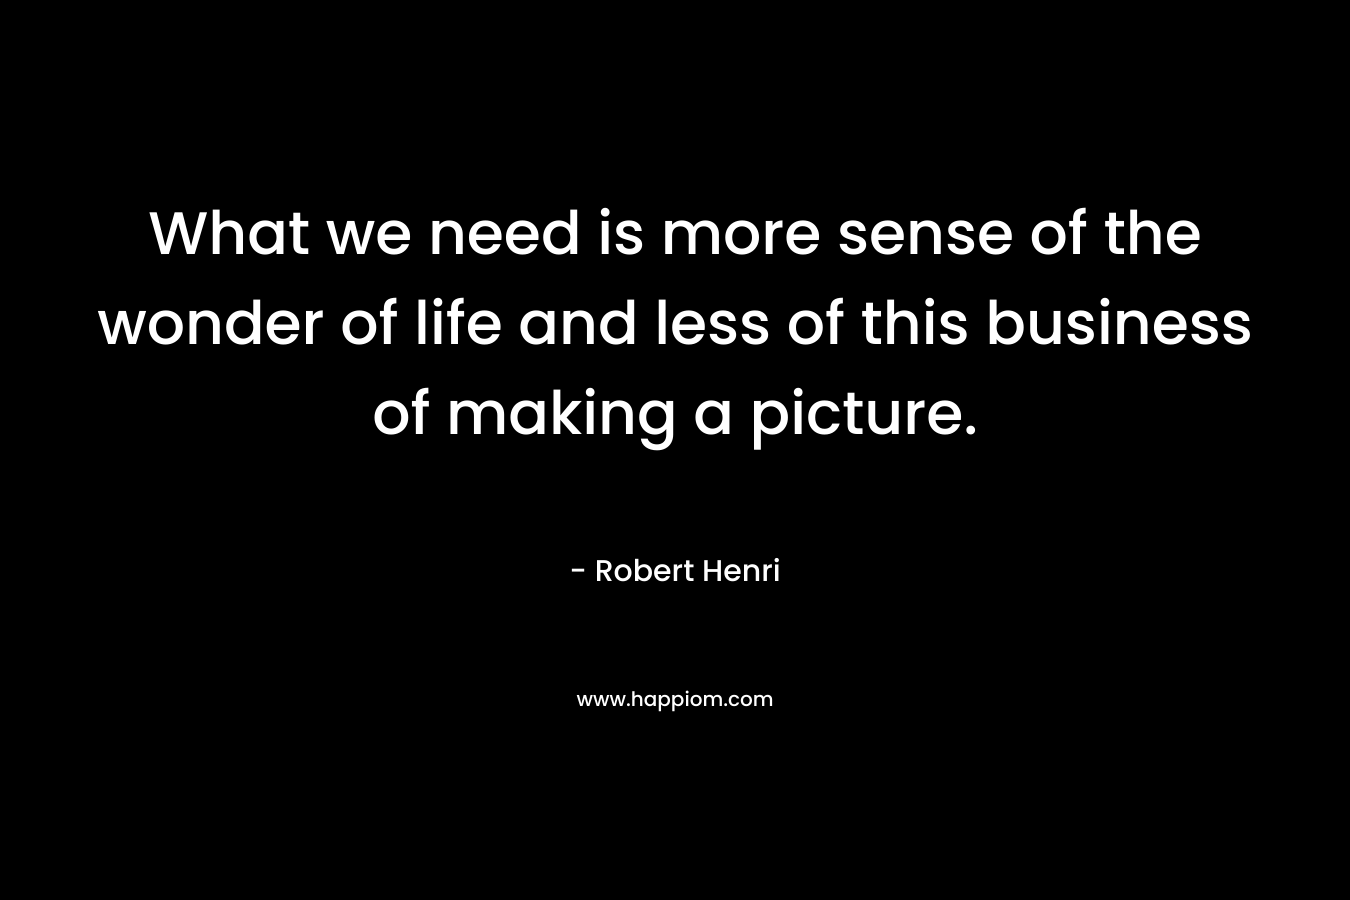 What we need is more sense of the wonder of life and less of this business of making a picture.